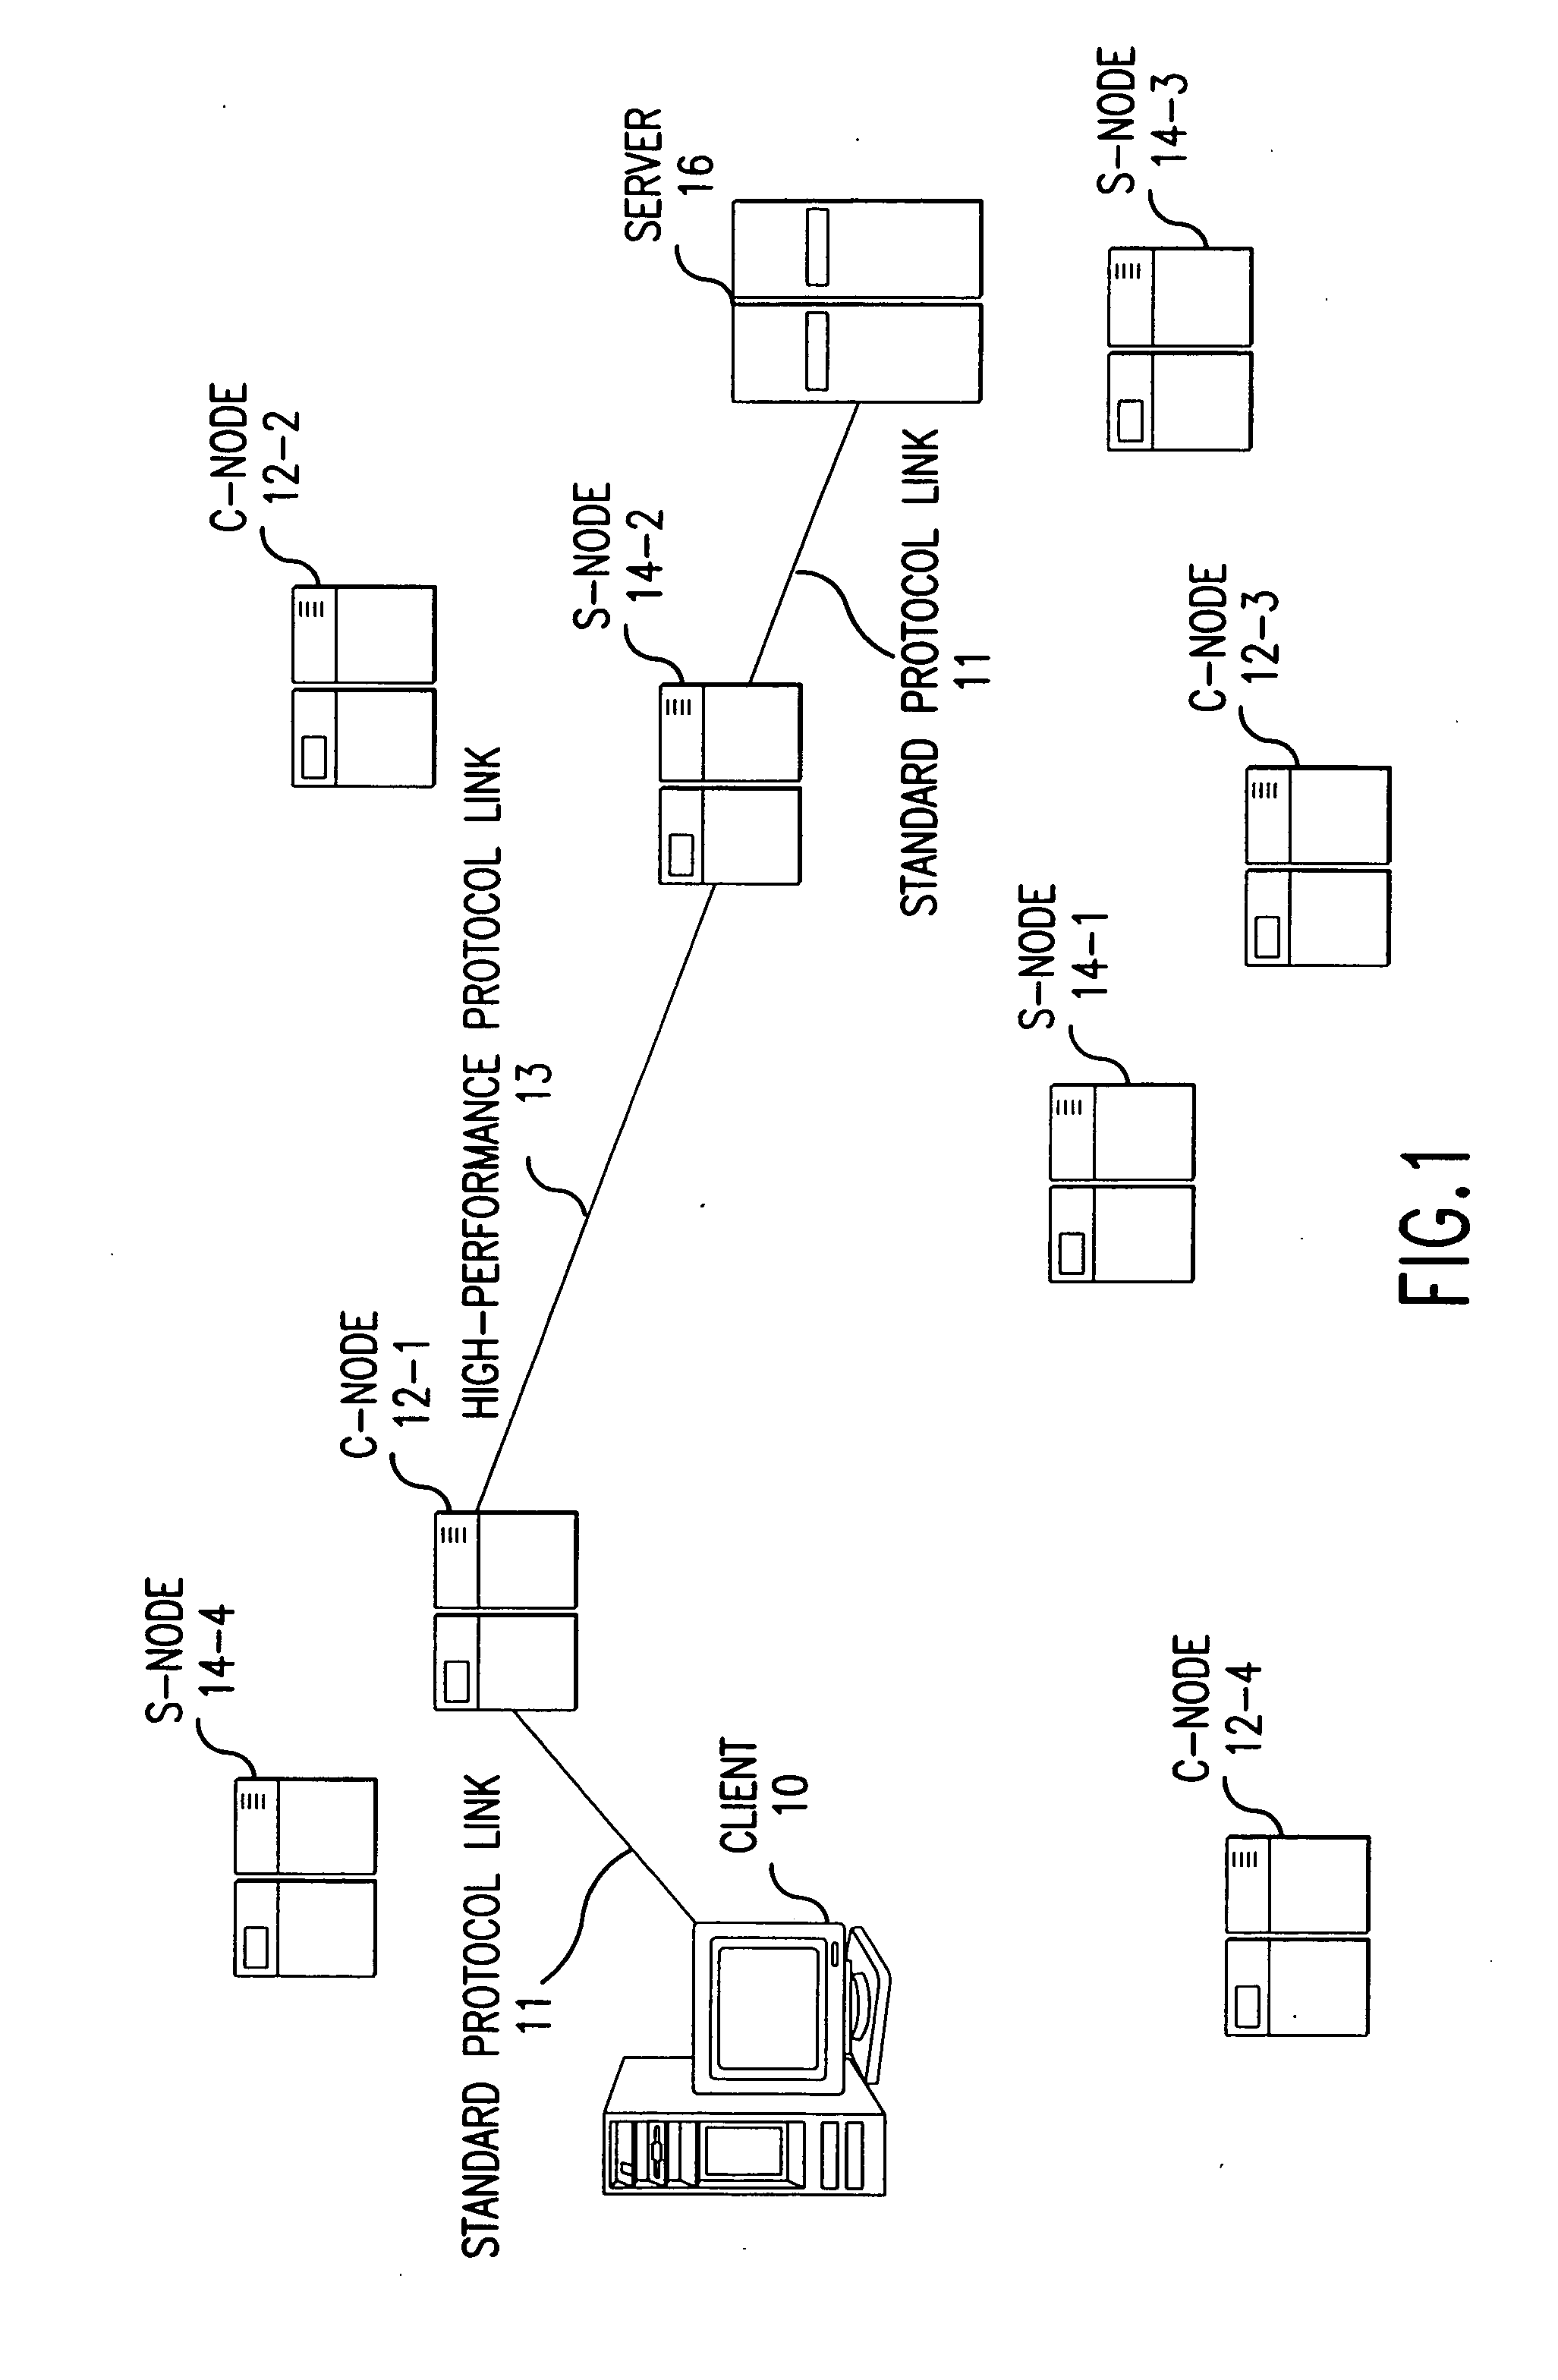 Method for high-performance delivery of web content